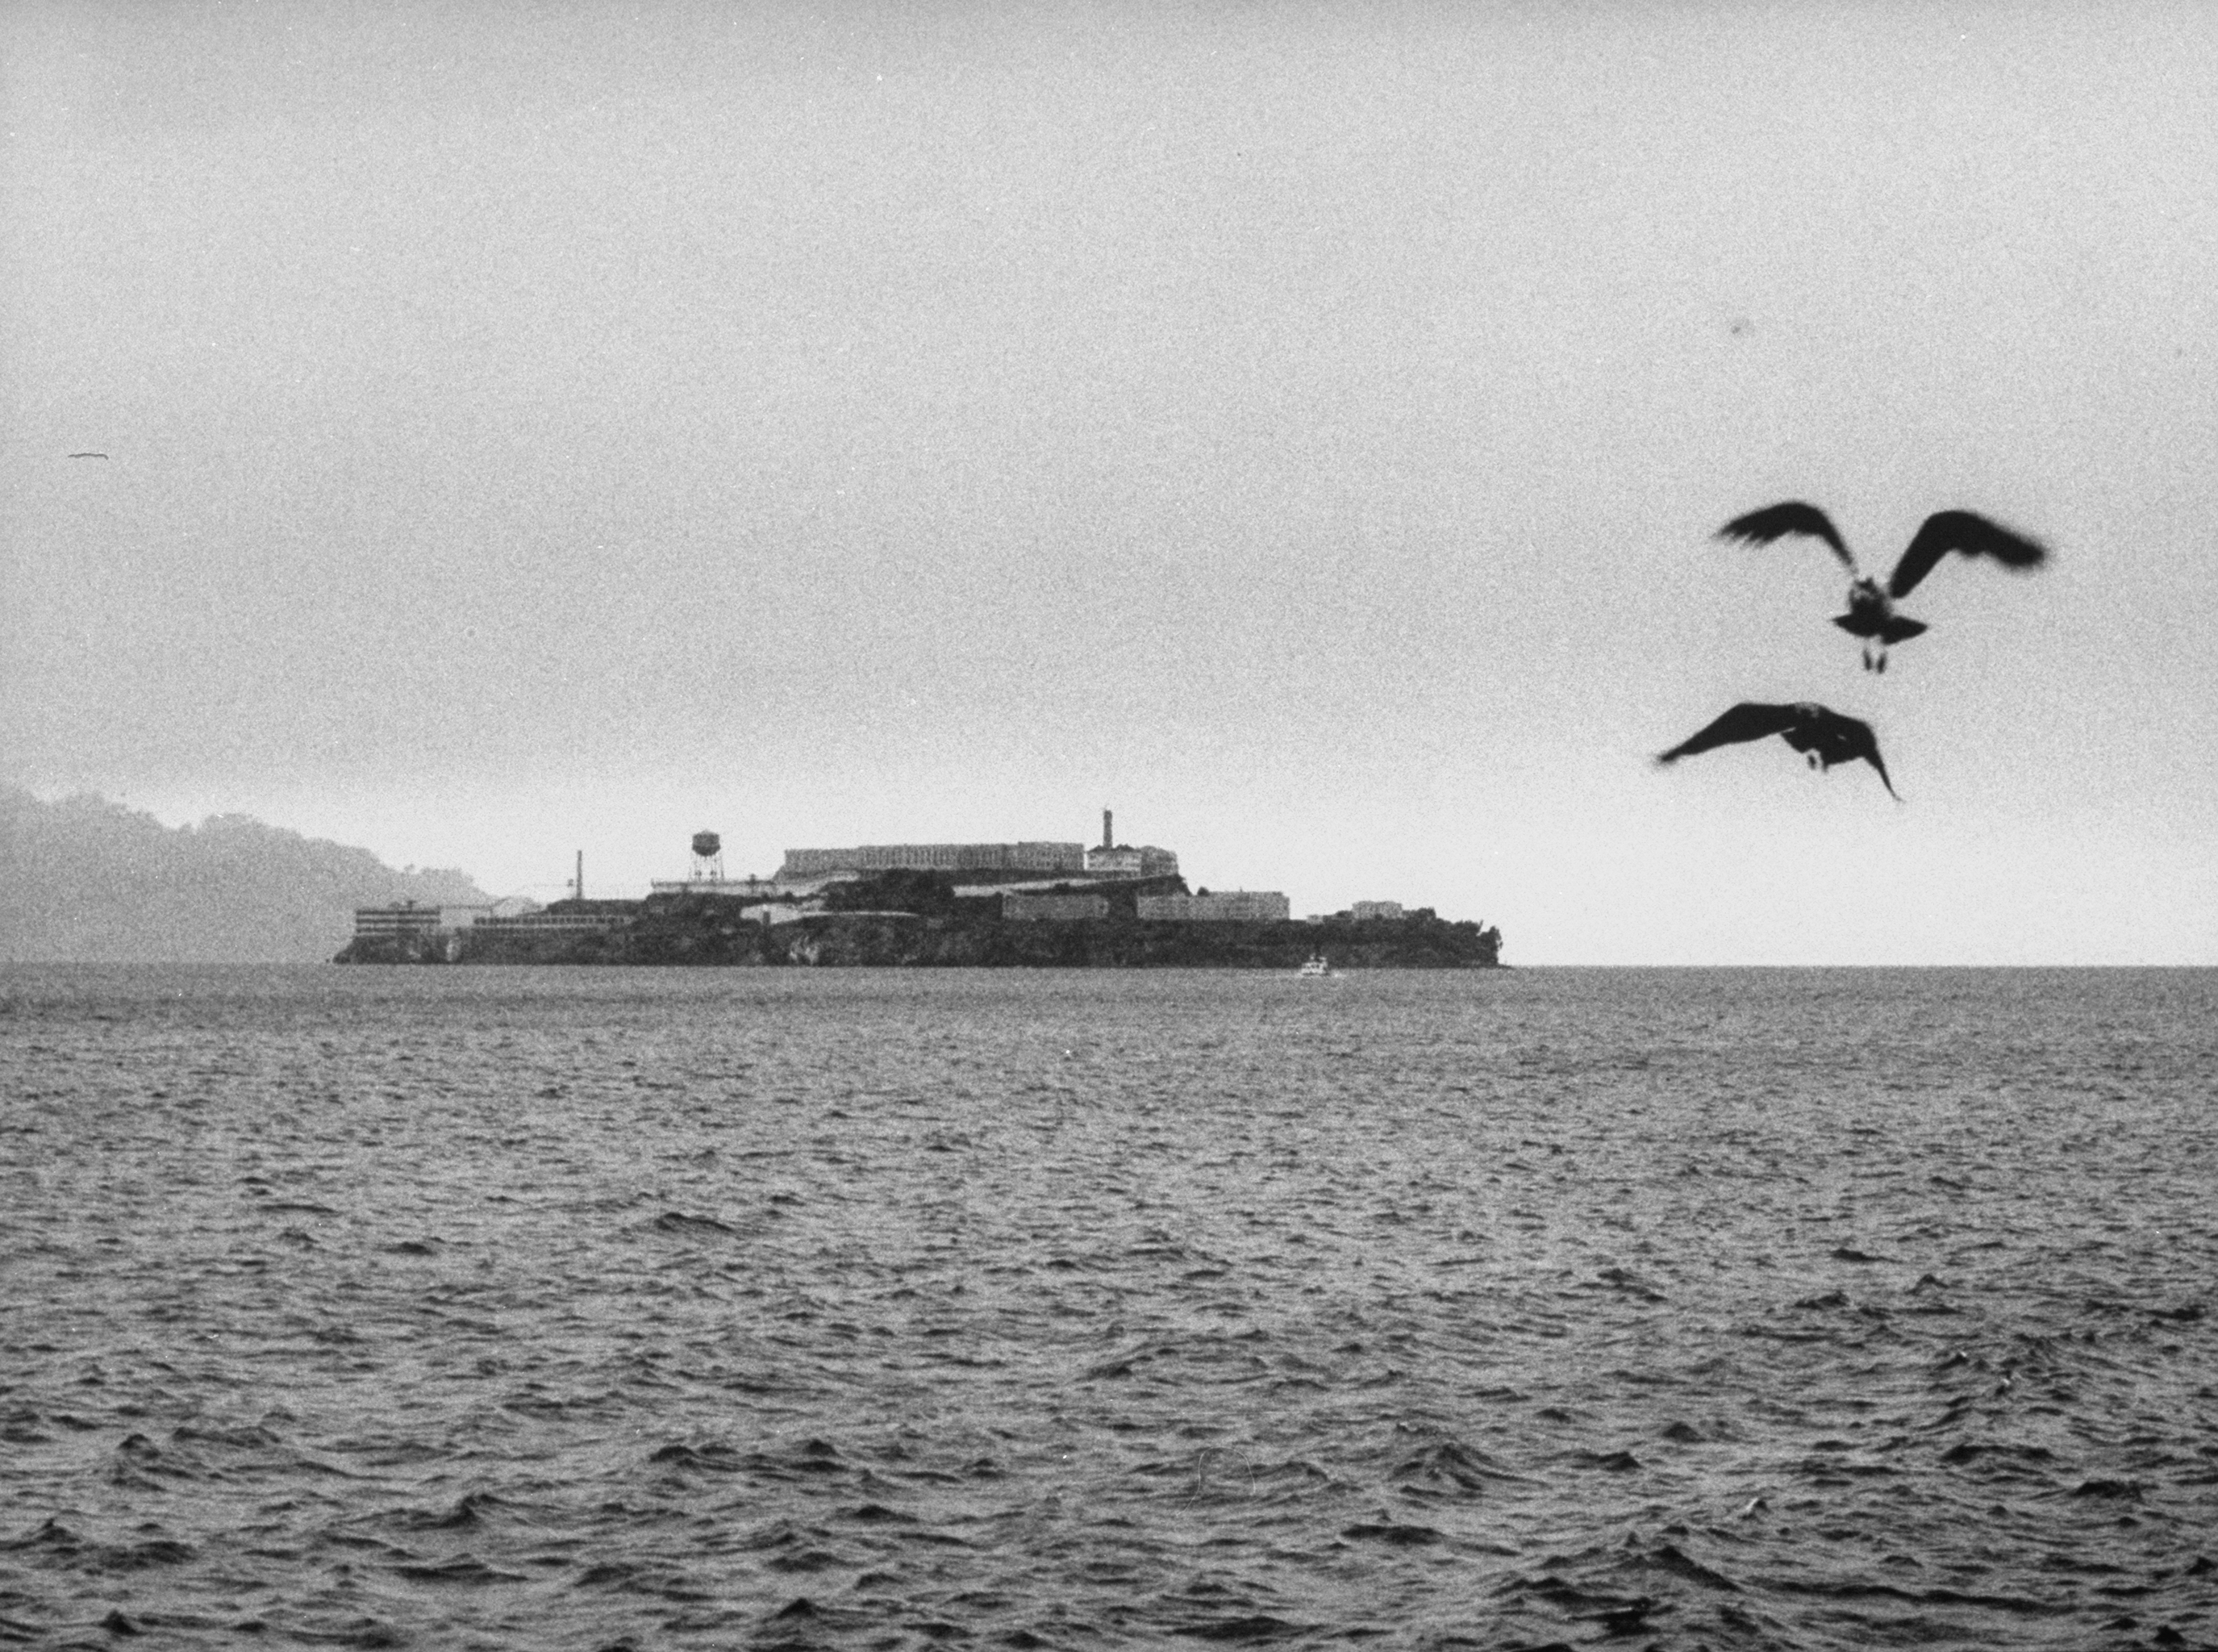 Picture of Alcatraz prison, after the June 1962 escape. (Jon Brenneis&mdash;The LIFE Images Collection/Getty Images)